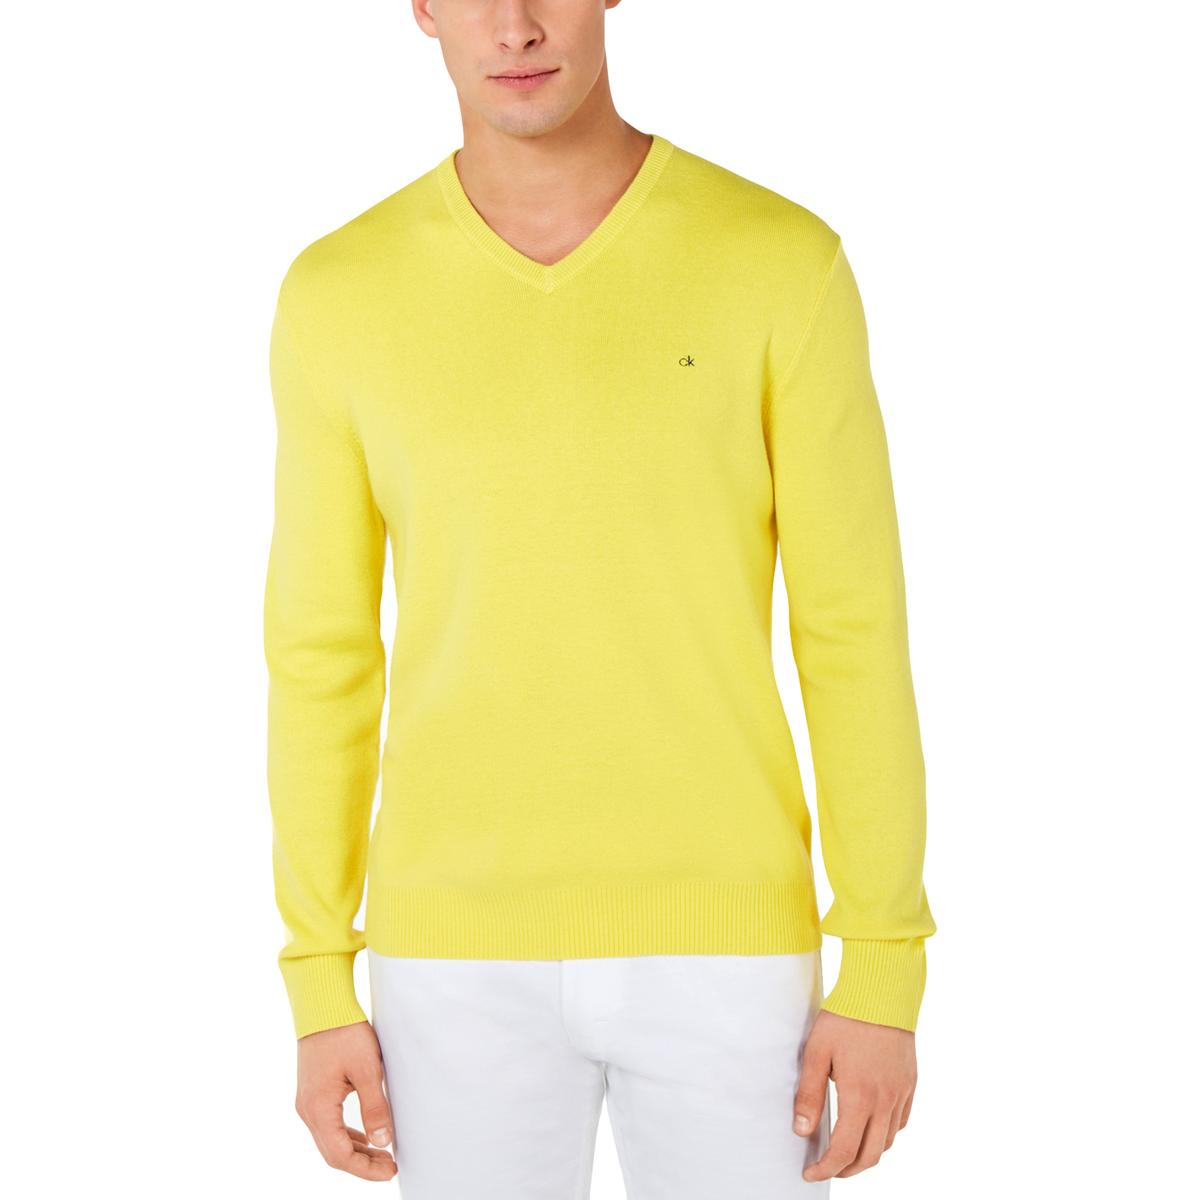 Calvin Klein Mens Yellow Ribbed V-Neck Pullover Sweater Top L BHFO 4234 ...